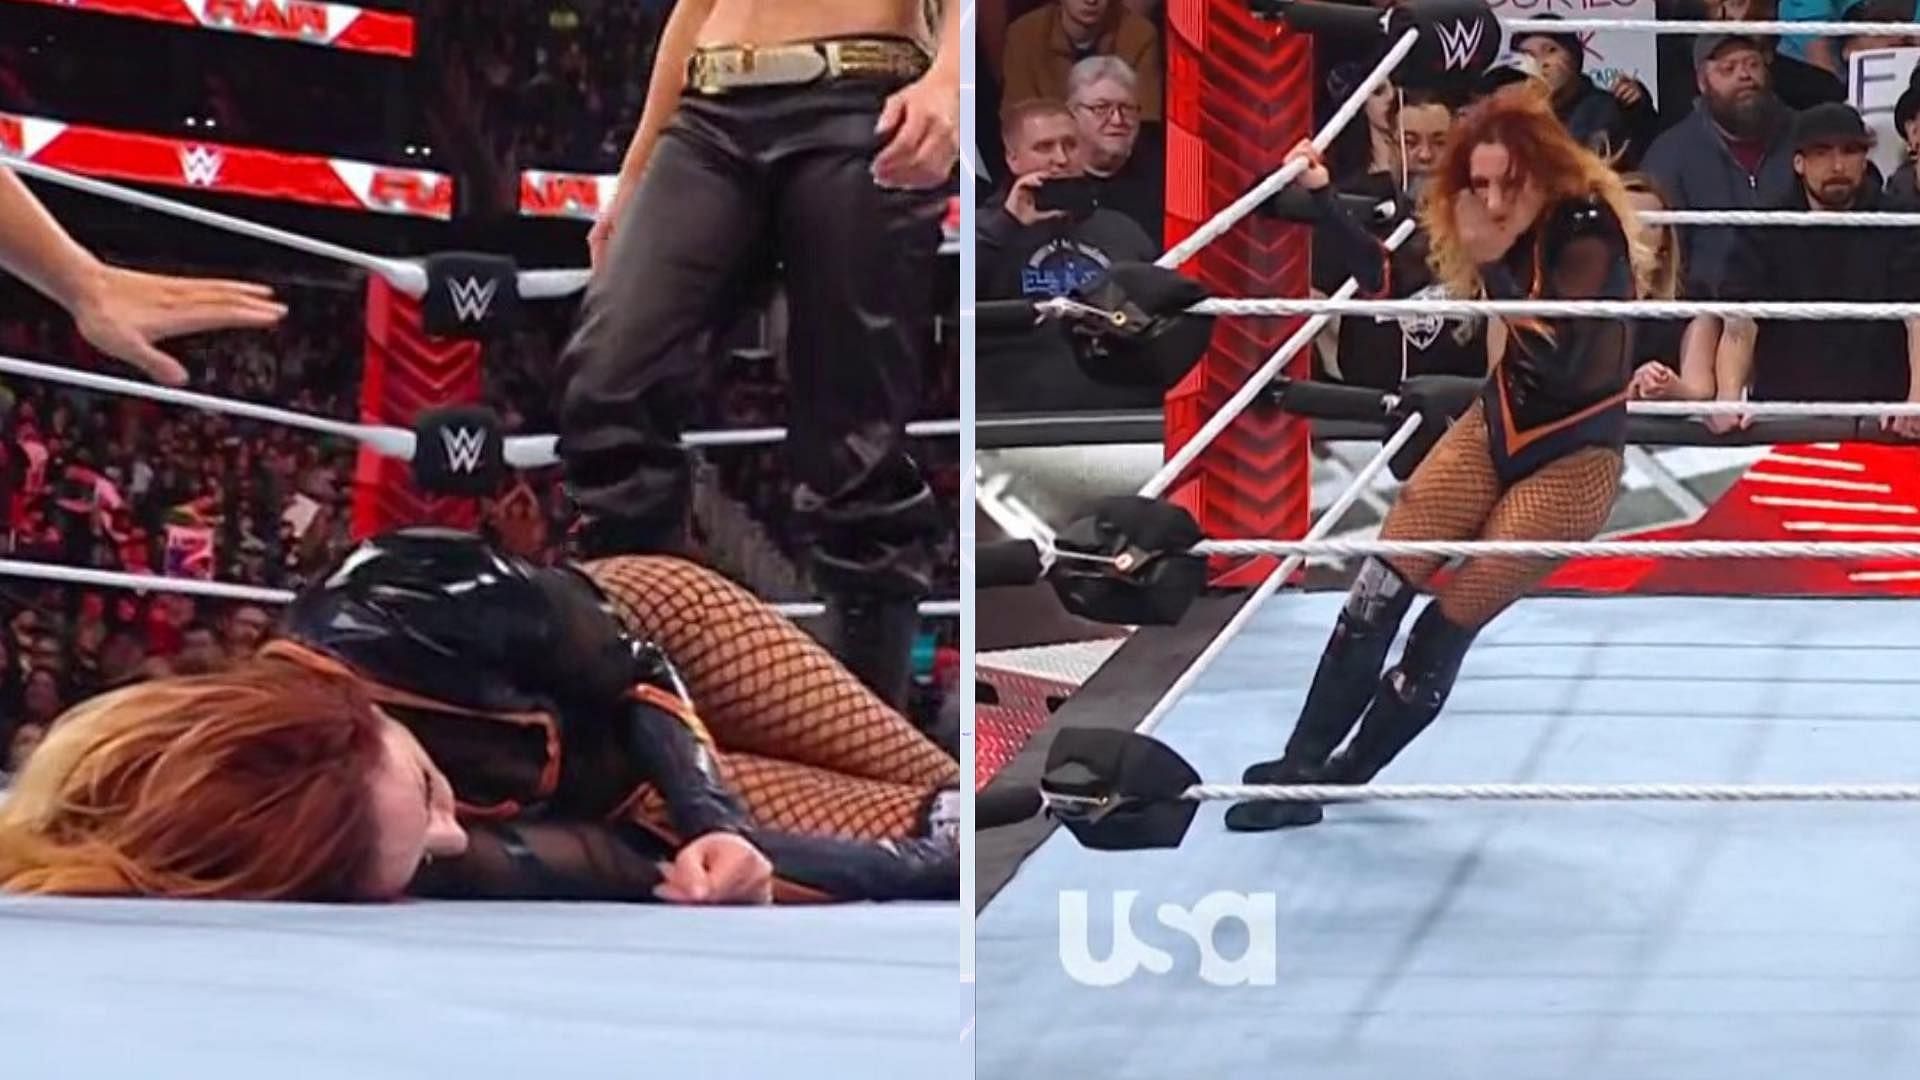 Becky Lynch became a former WWE Tag Team Champion after tonight